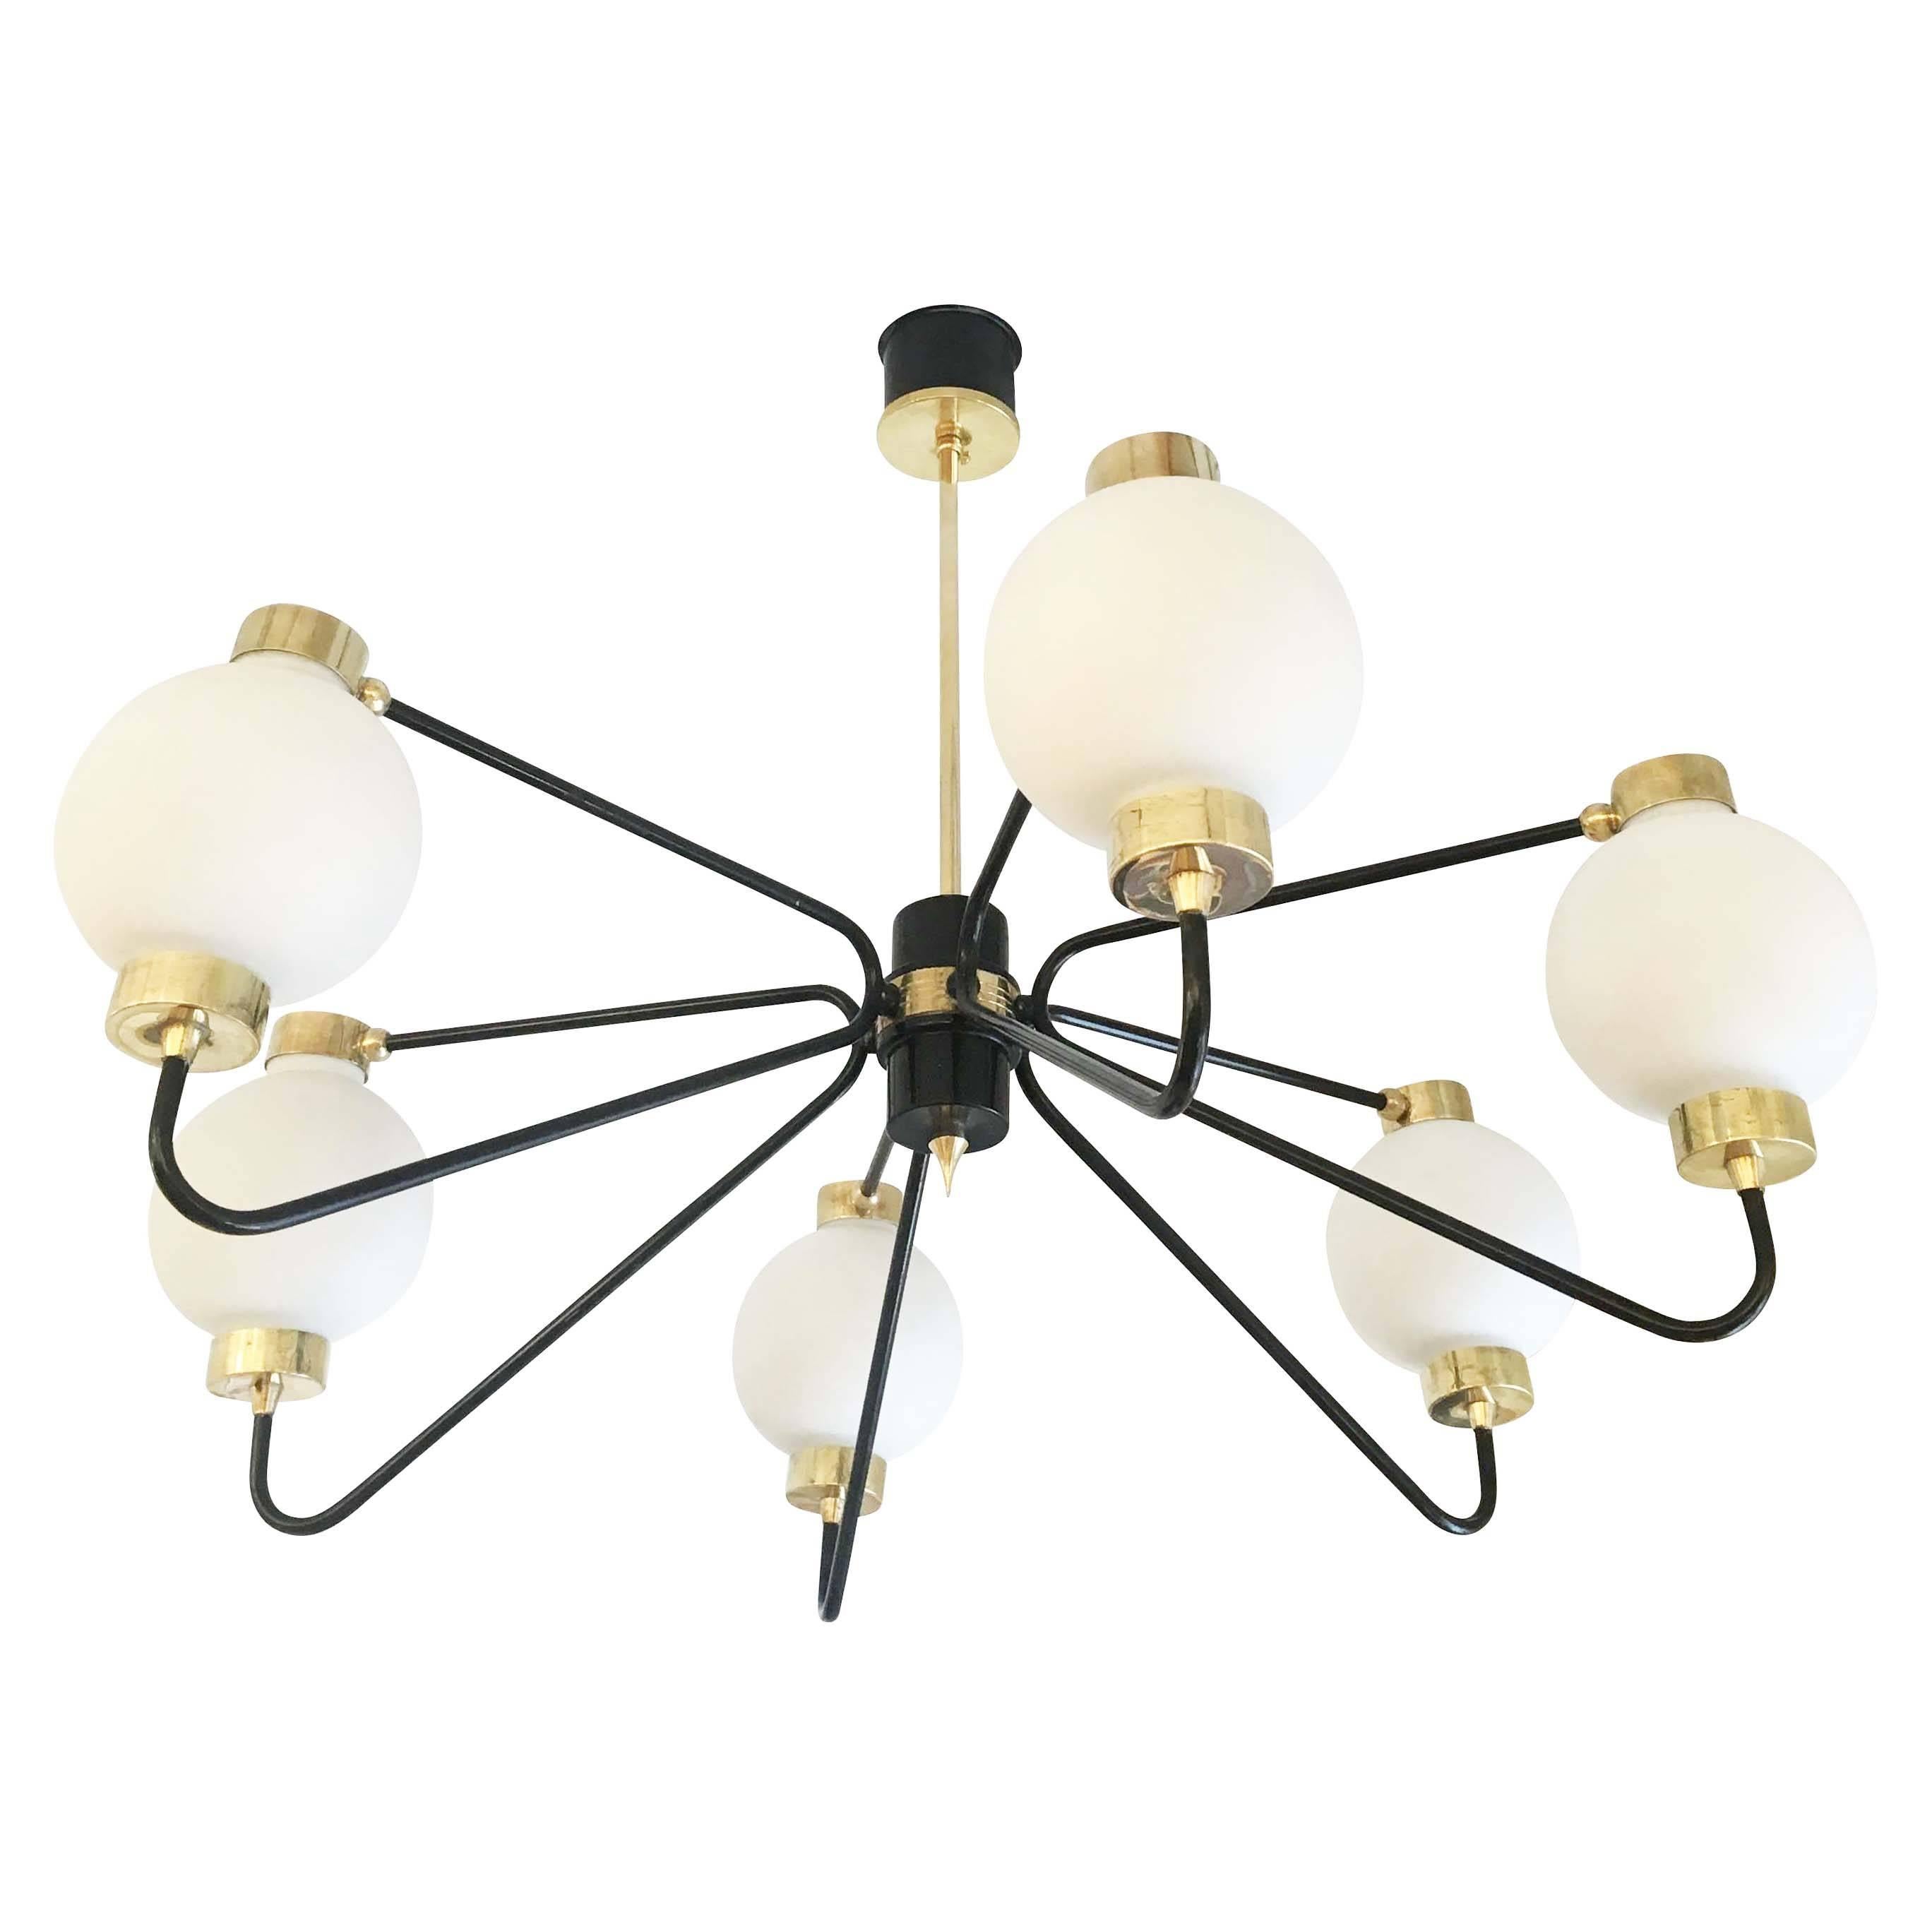 Stilnovo attributed chandelier with six frosted glass shades on a brass and black lacquered frame. Drop can be adjusted as needed. Holds six candelabra sockets. Light bulbs are changed by pulling up the upper arms of the frame and slipping out the